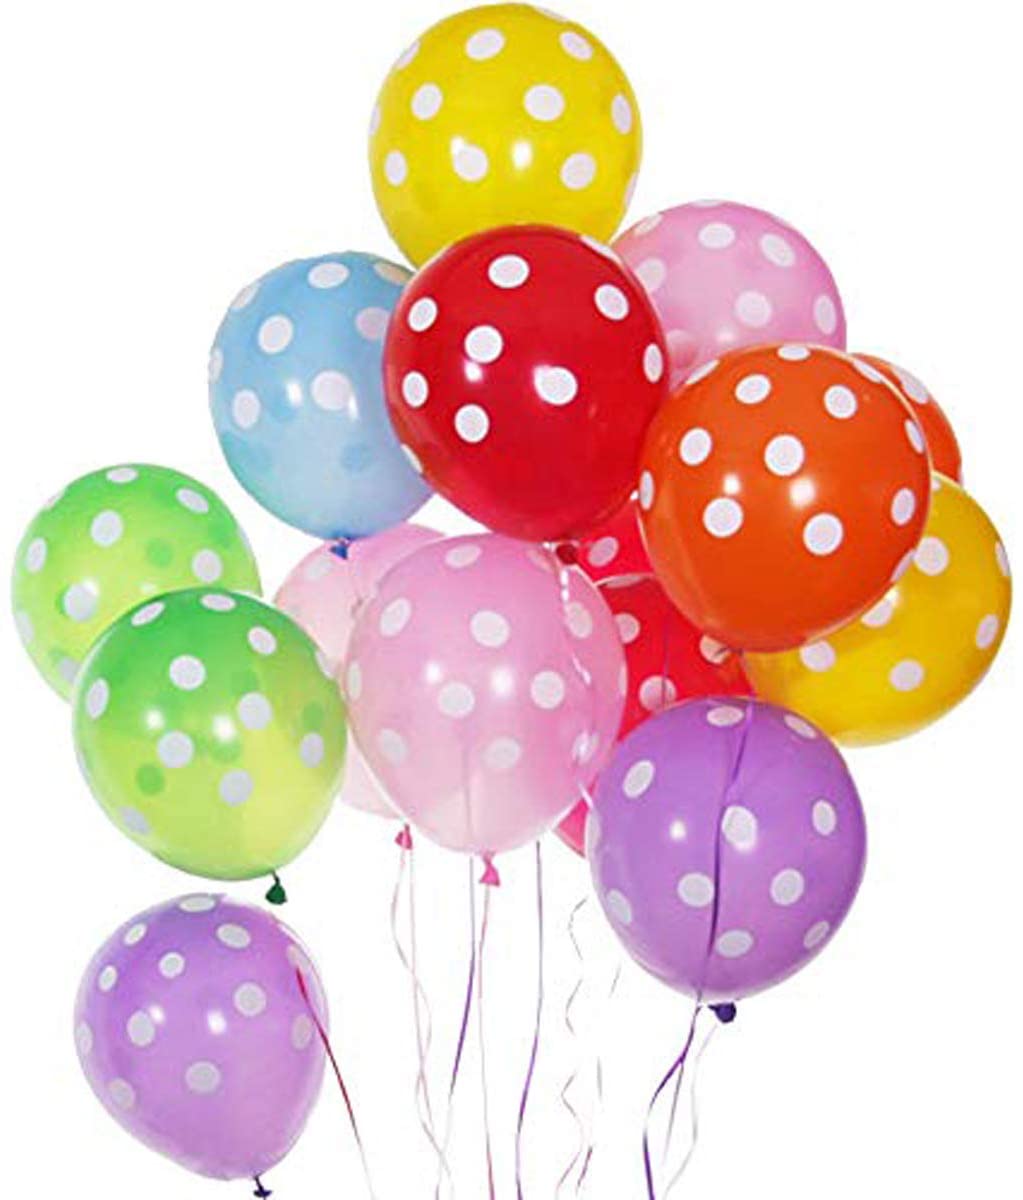 Details about   10pcs 12" Mixed Color Confetti Filled Latex Balloons Birthday Party Free Pump 